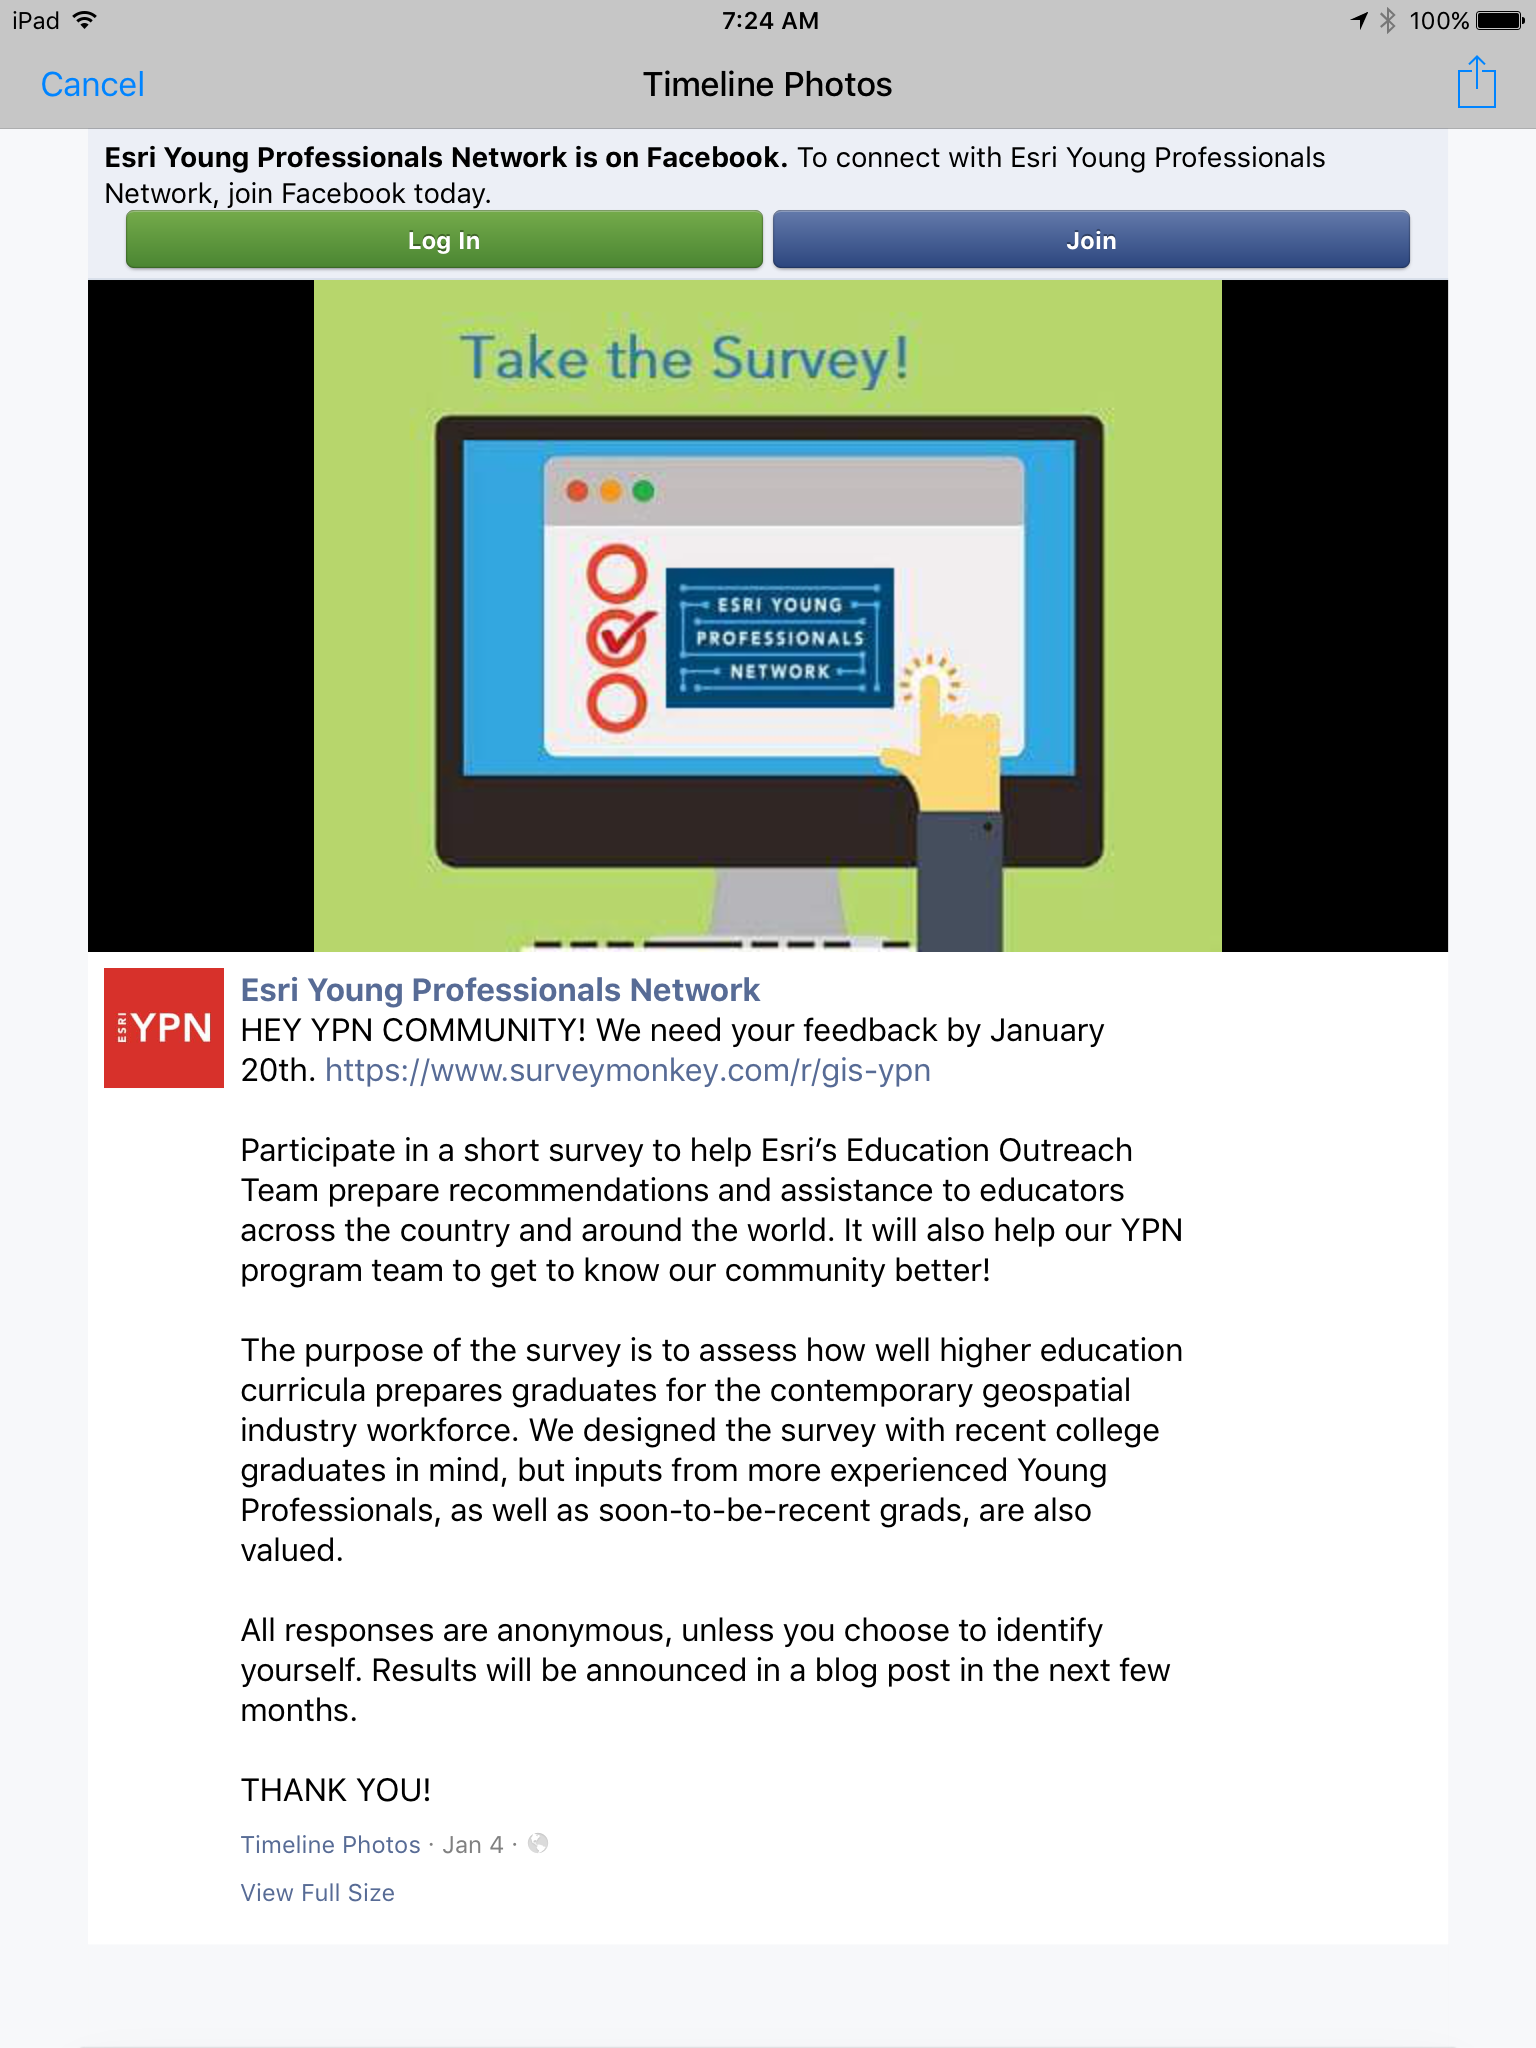 Facebook invitation to YPN members to participate in survey.